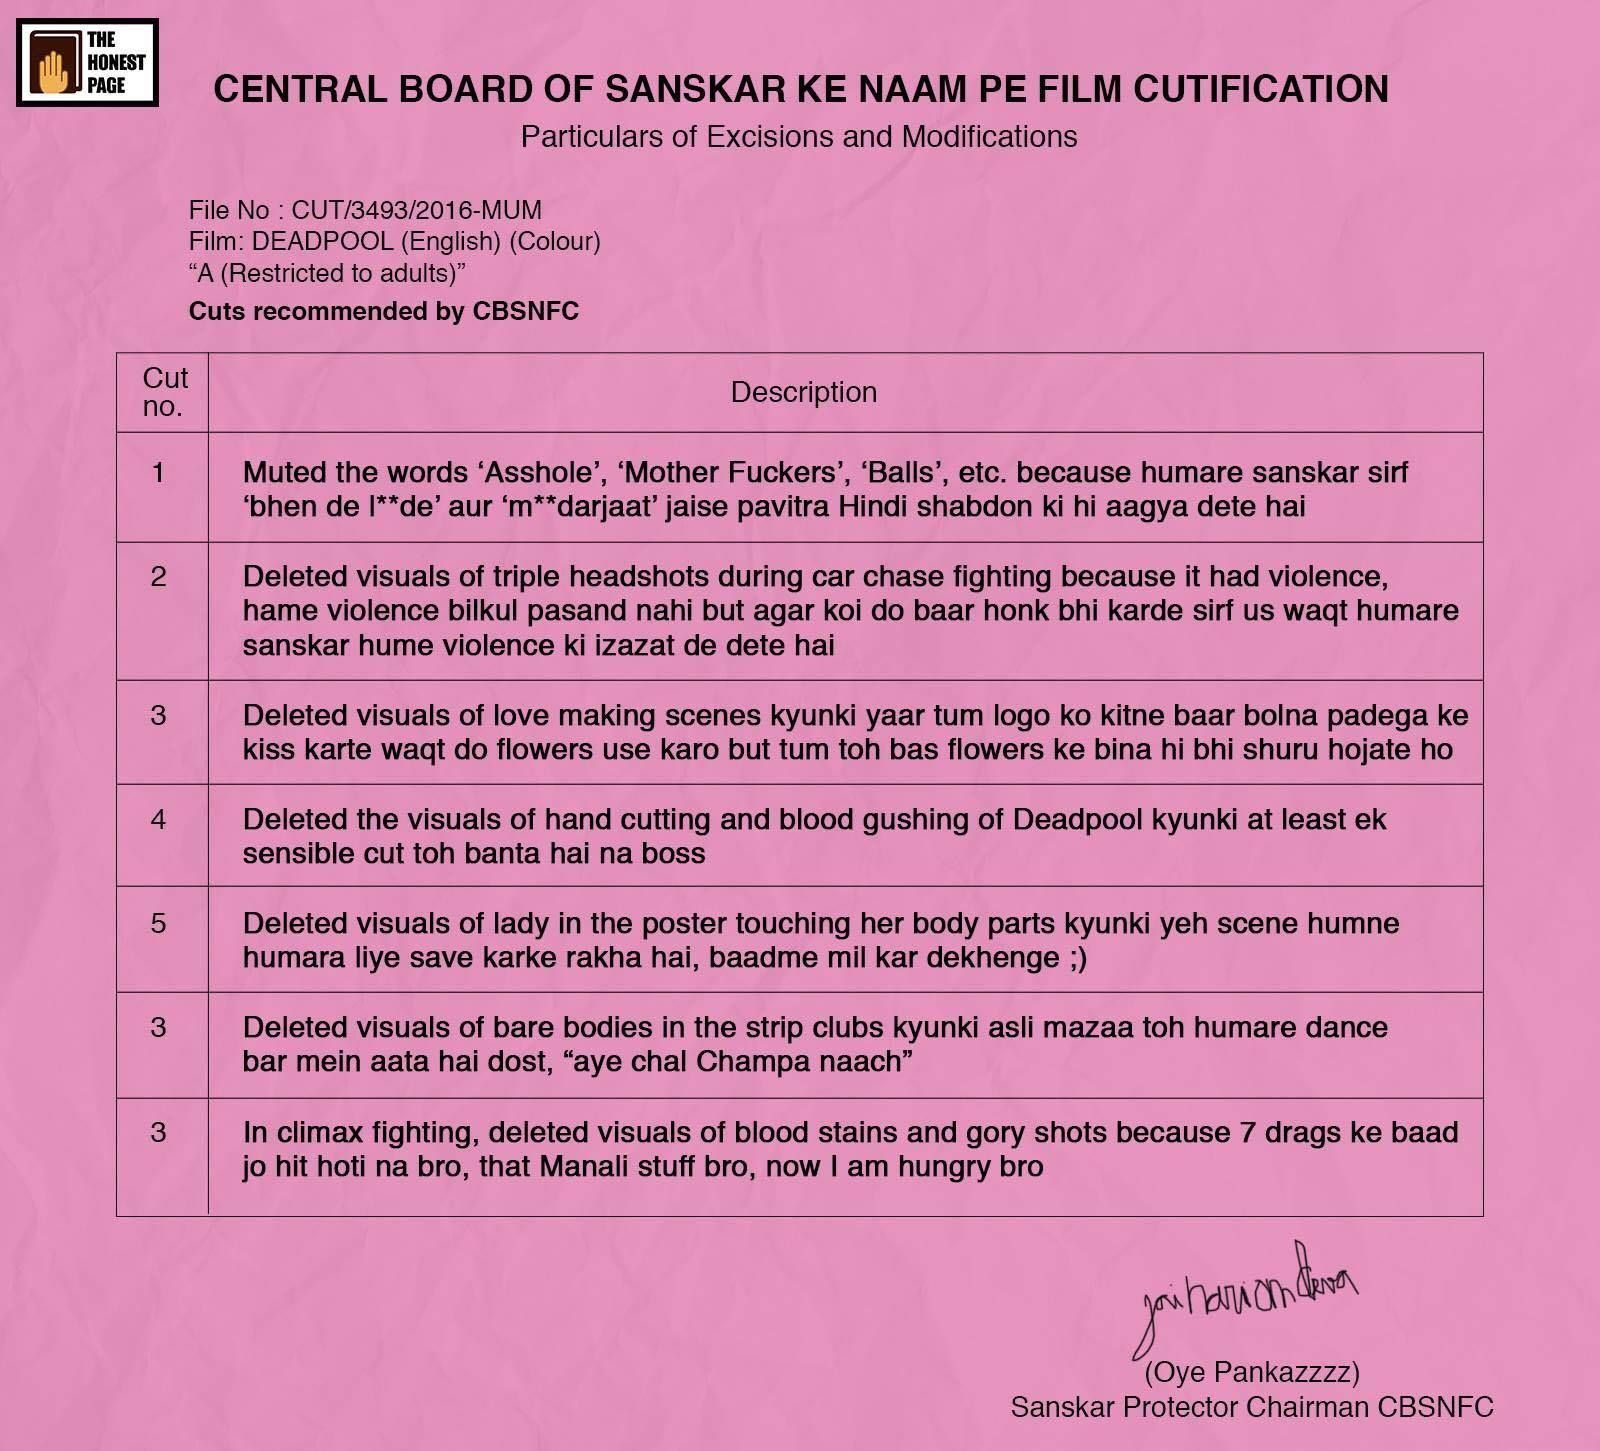 The Honest Page is at it again, Guess who’s at the receiving end? The Sanskari Censor Board!